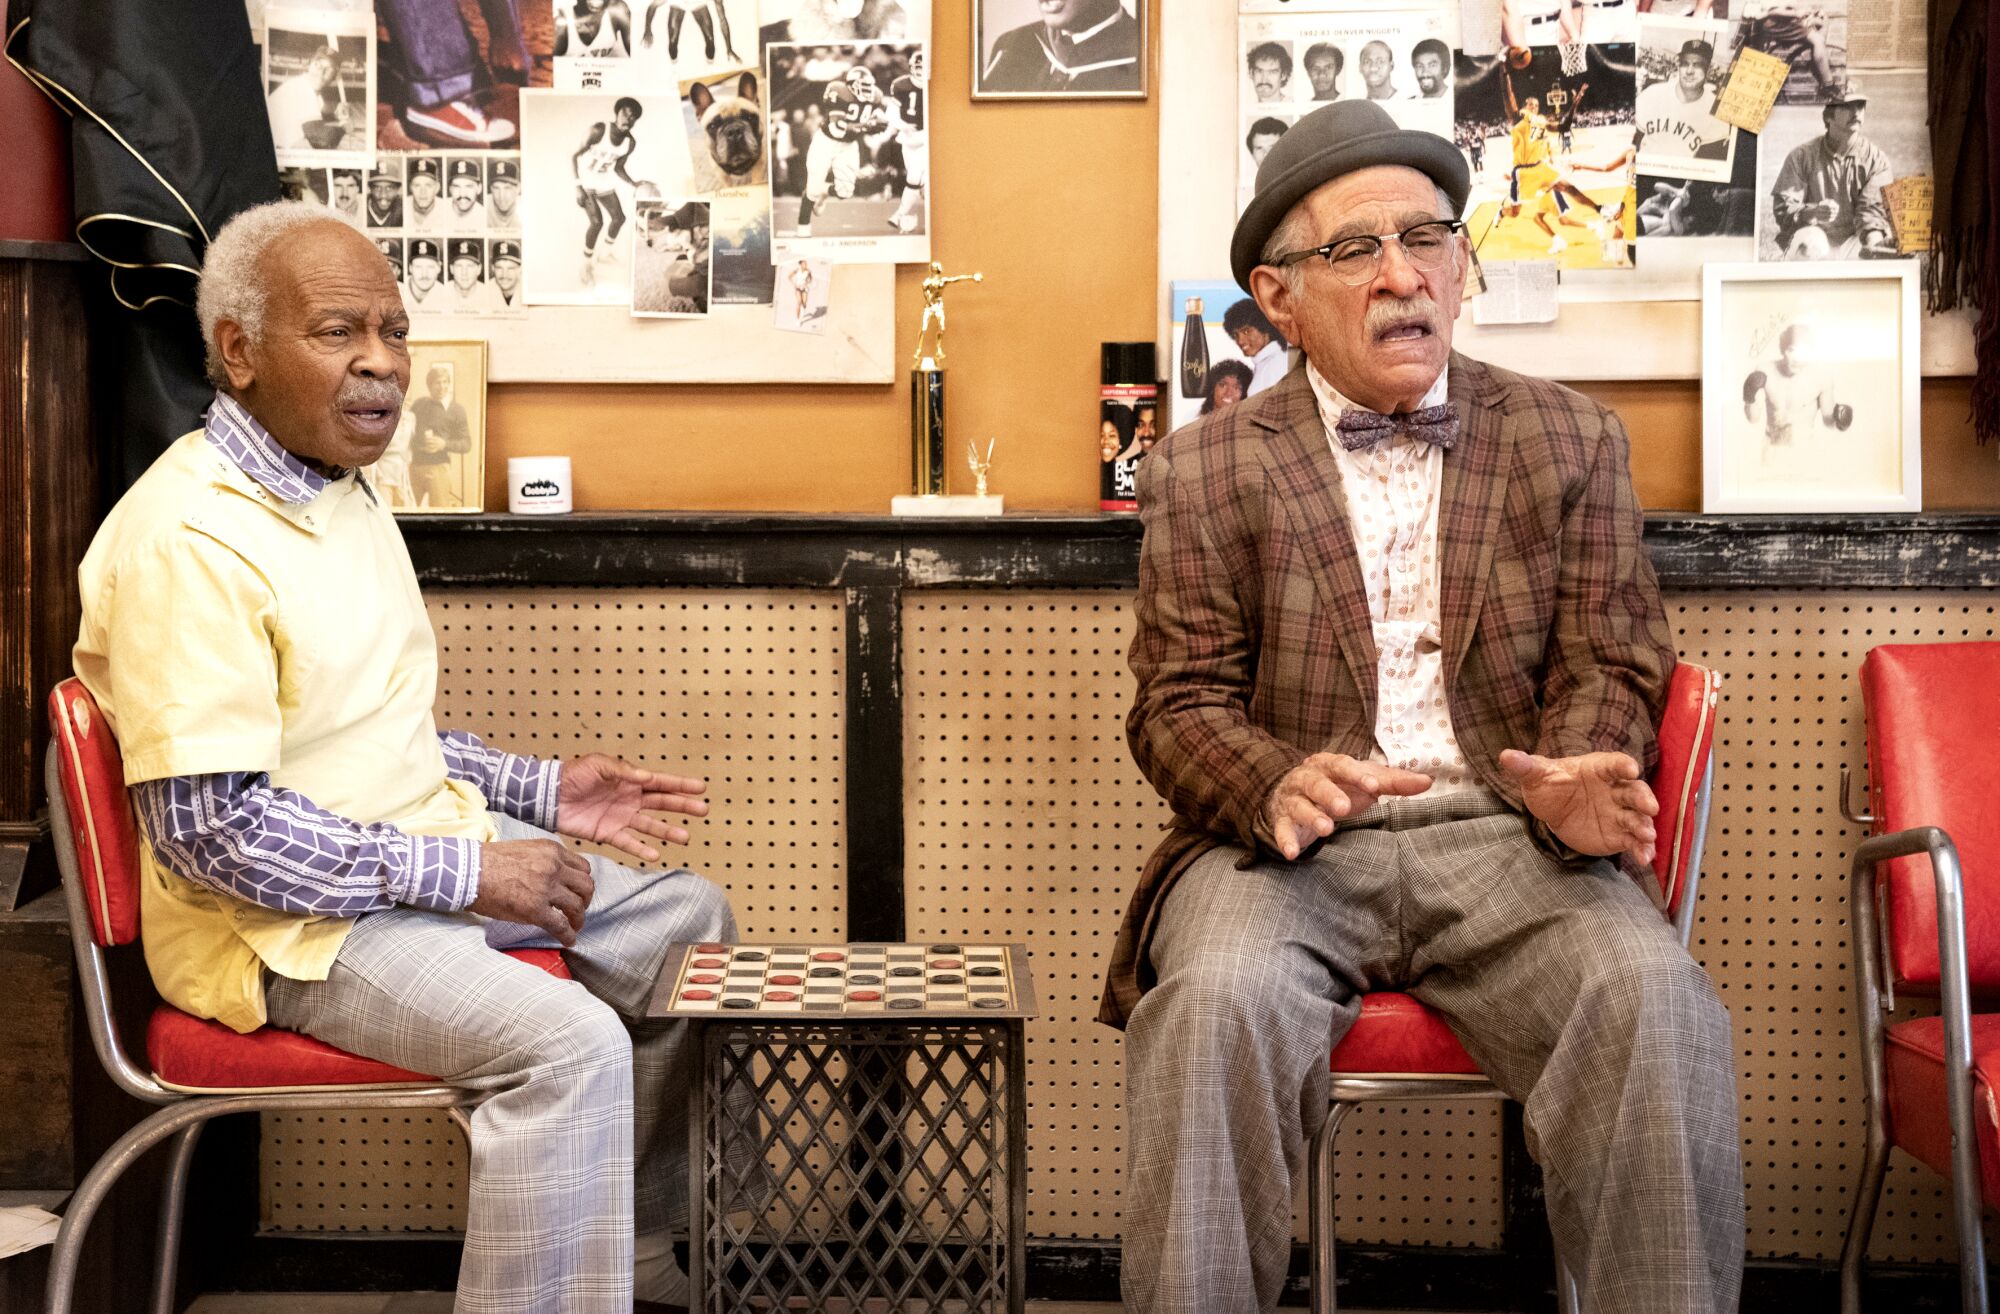 Two older men sit and chat in "Coming 2 America."